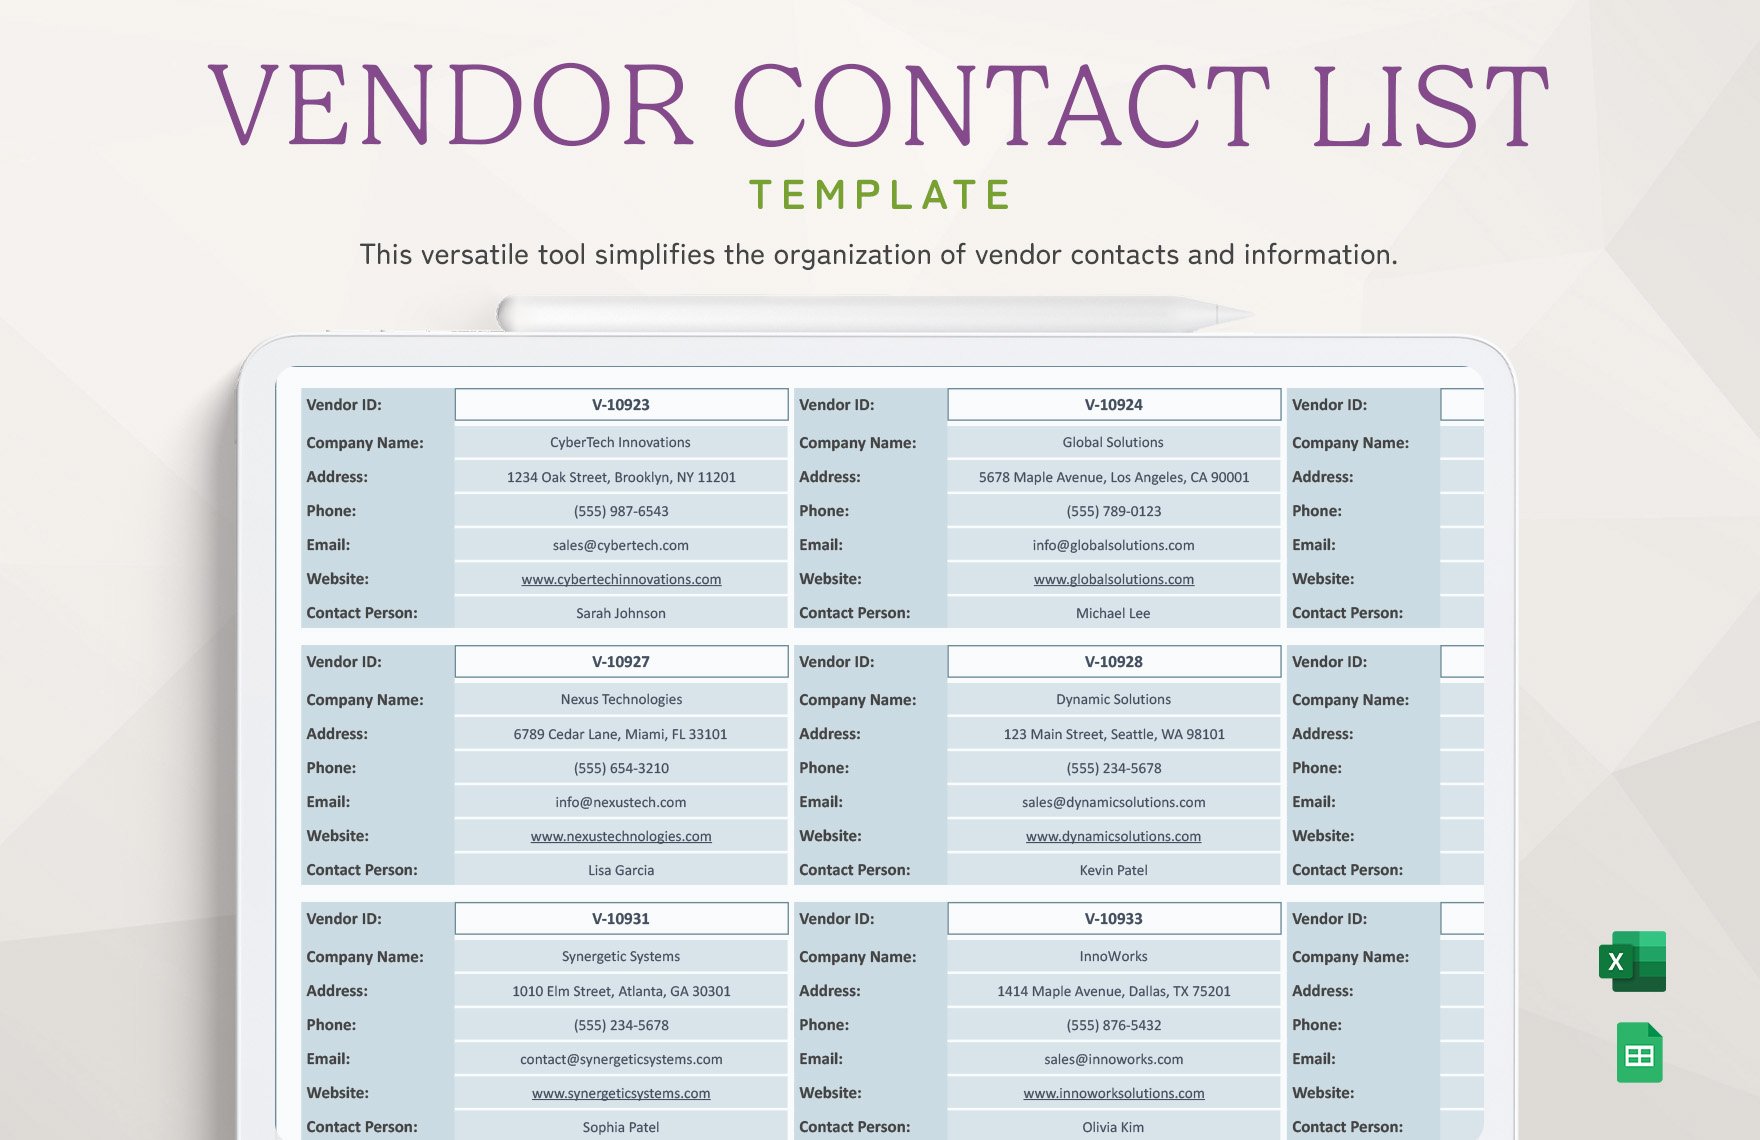 Vendor Contact List Template in Excel, Google Sheets